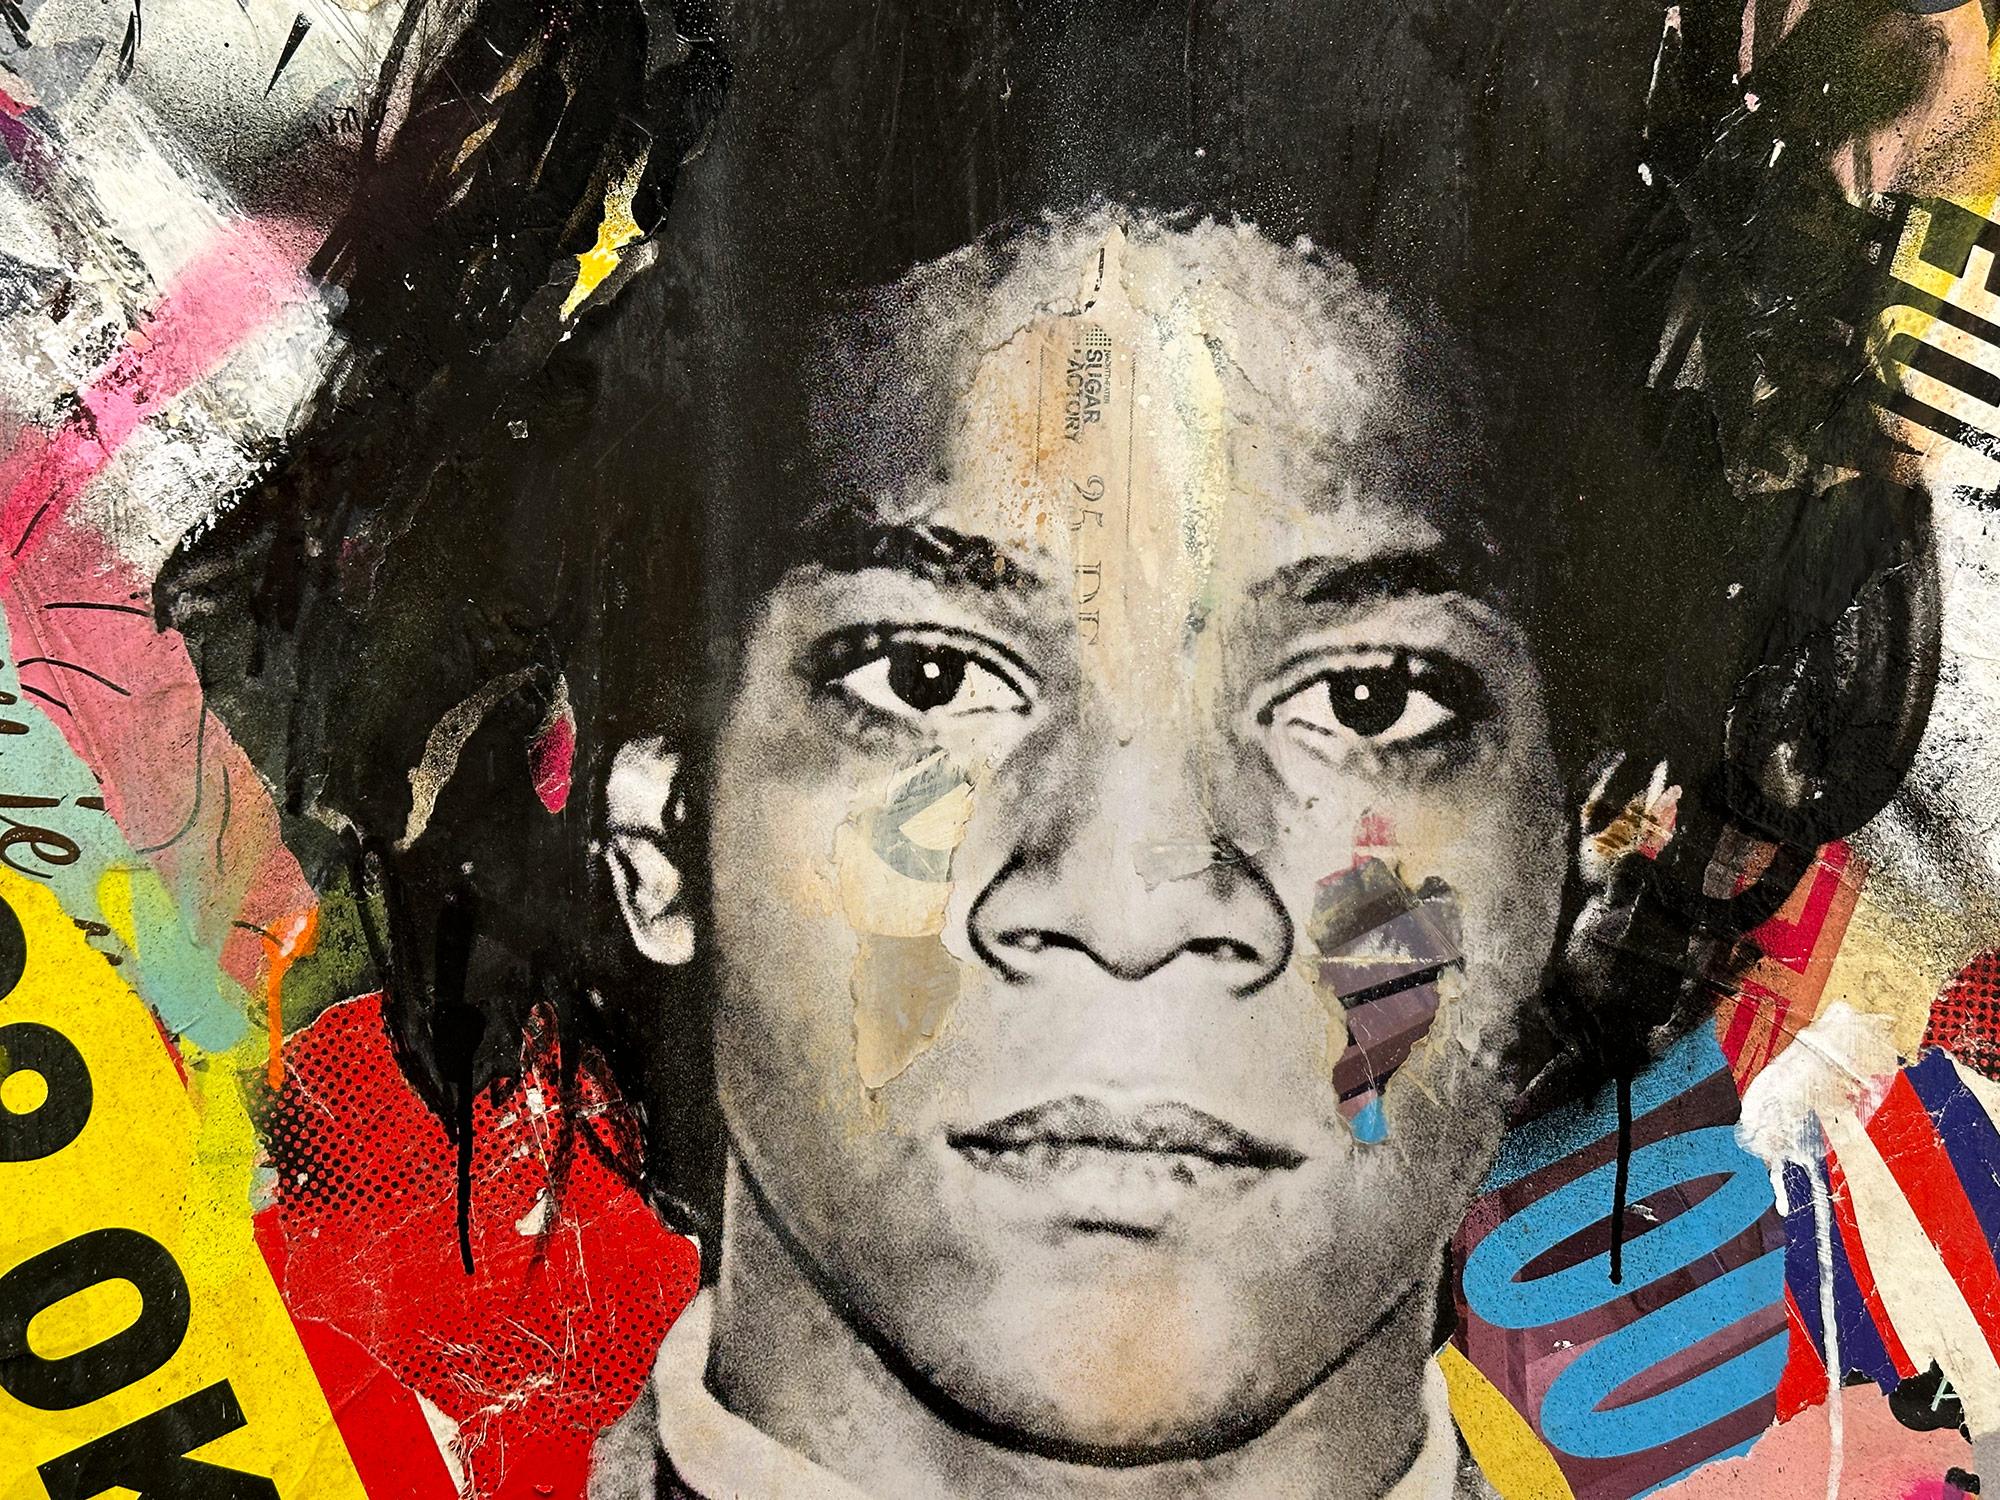 This piece depicts famous artist, Jean-Michel Basquiat. Done with beautiful expressive colors and a distinctive street art design, this piece pops with energy and romantic beauty. Its composition and bold collage make a wonderful statement and have